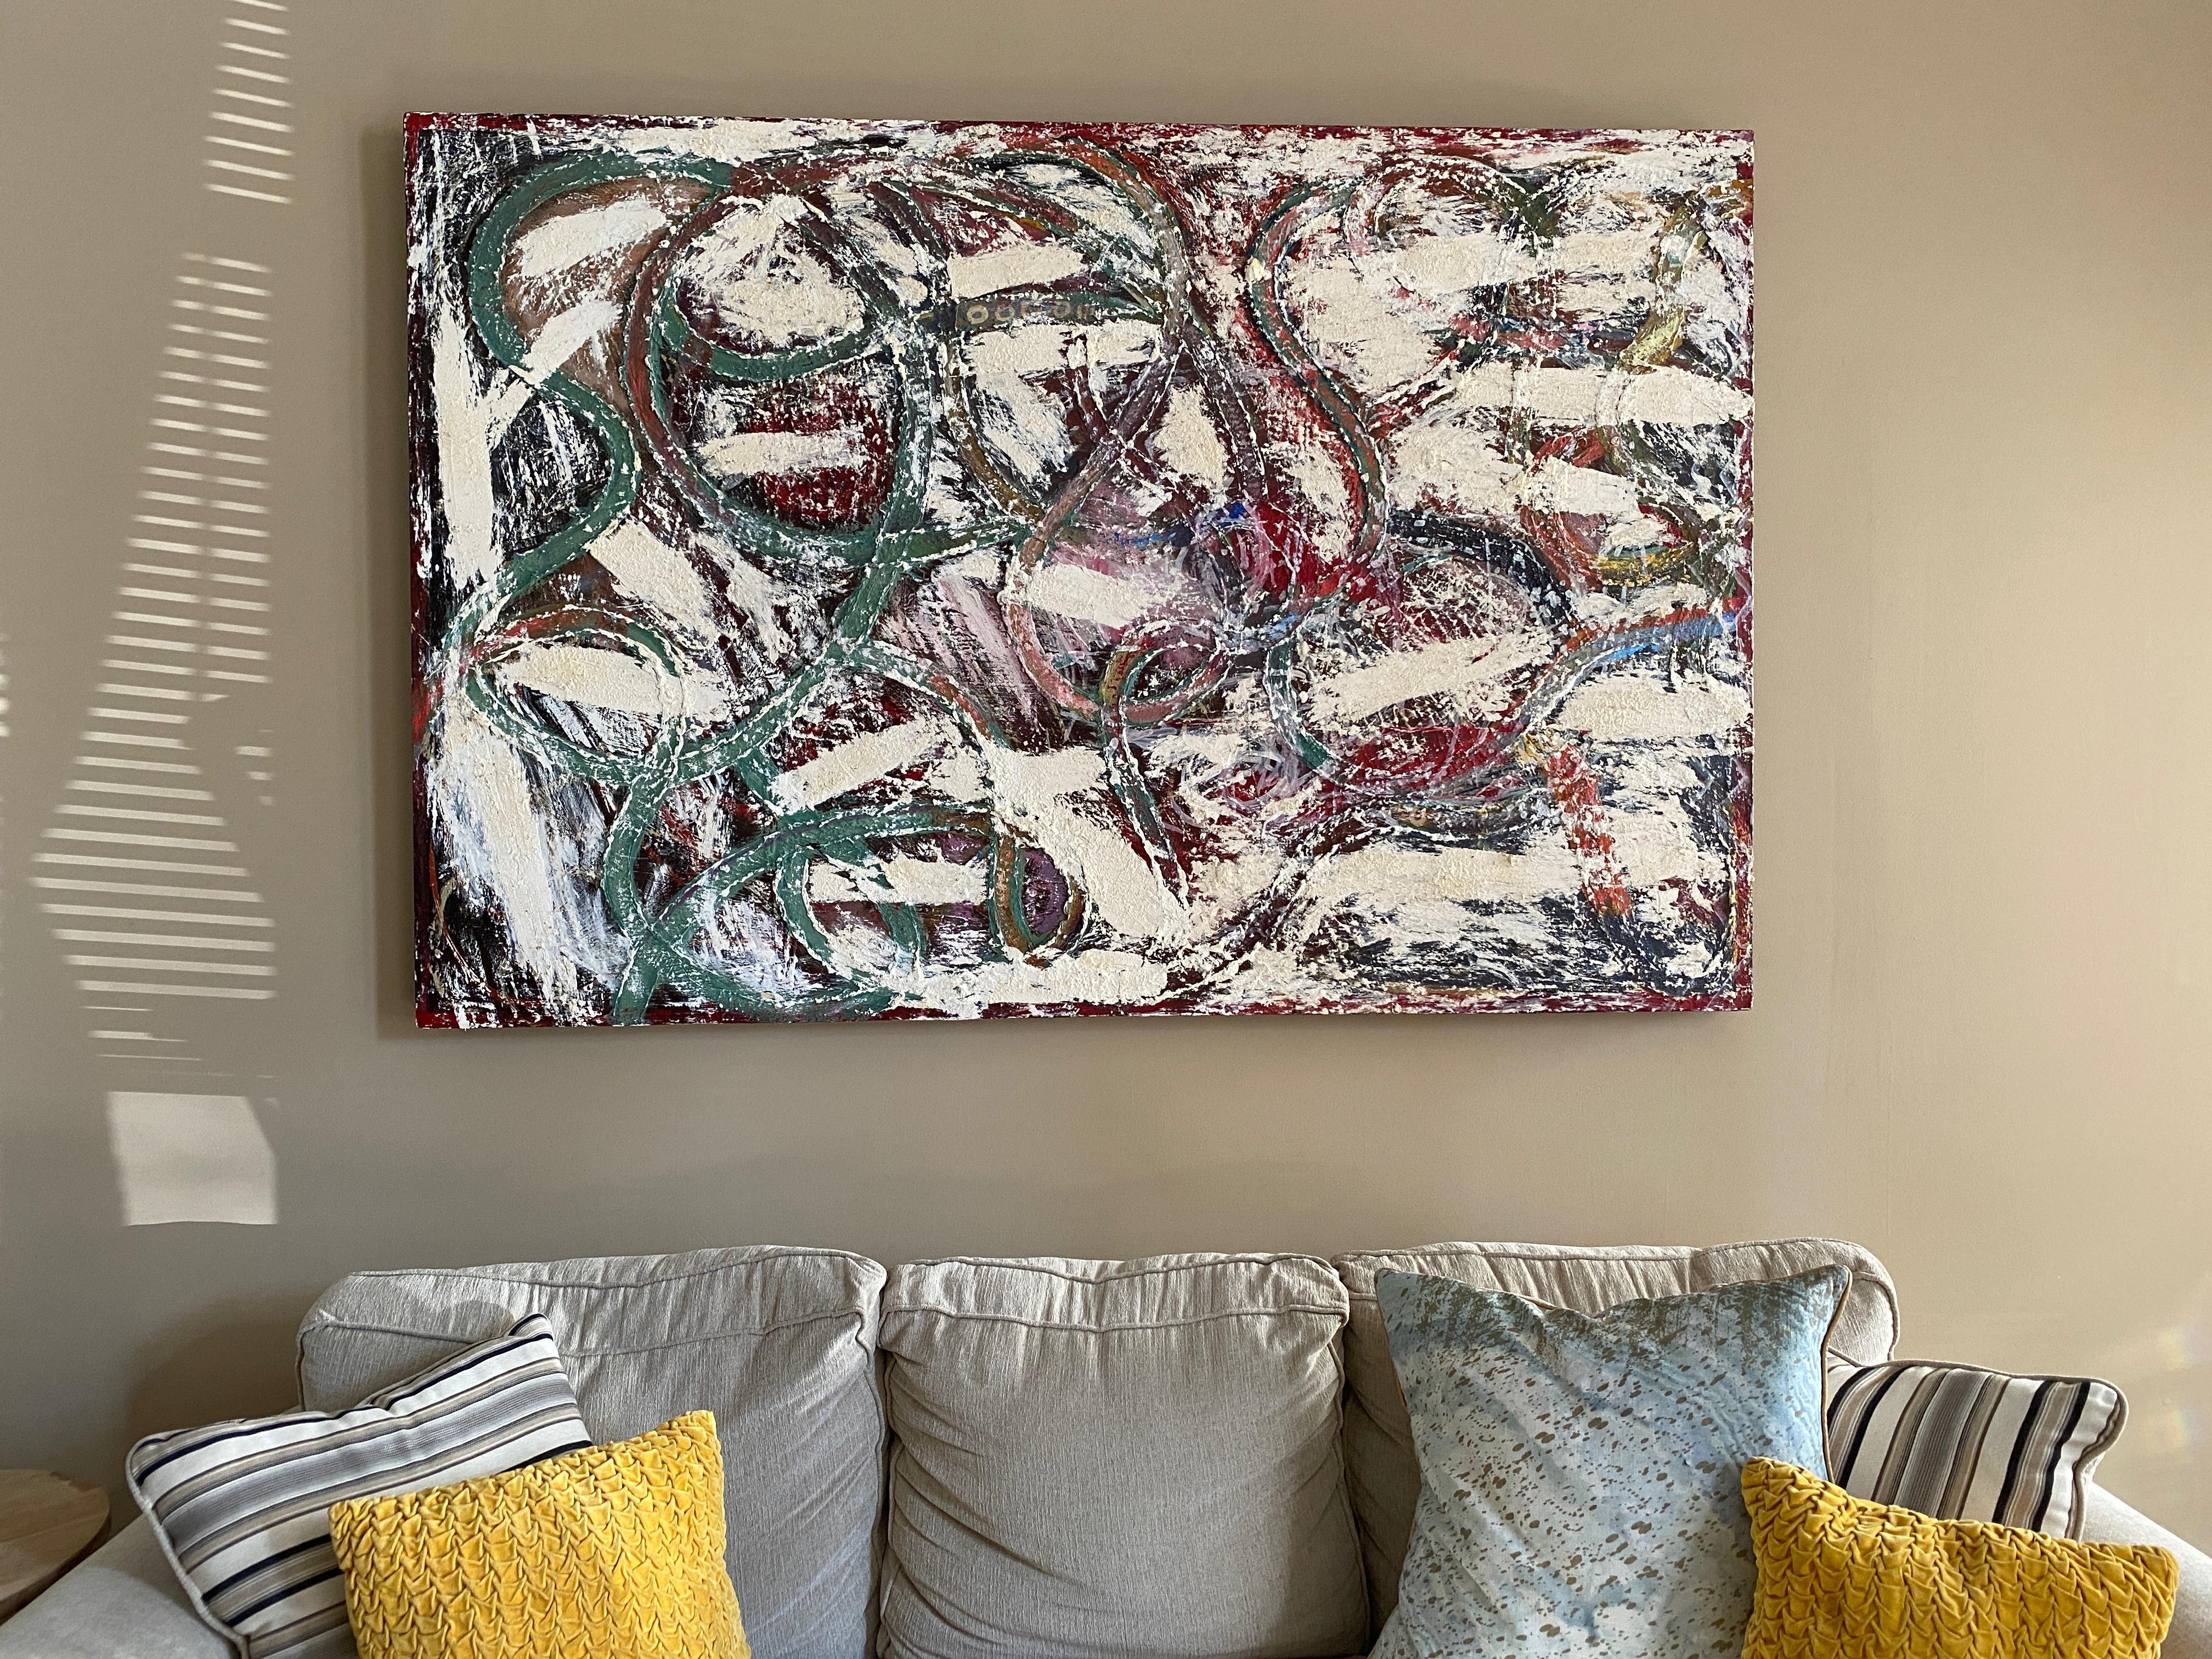 An Afternoon In June - Abstract expressionist oil painting on panel - Gray Abstract Painting by Dustin Hedrick